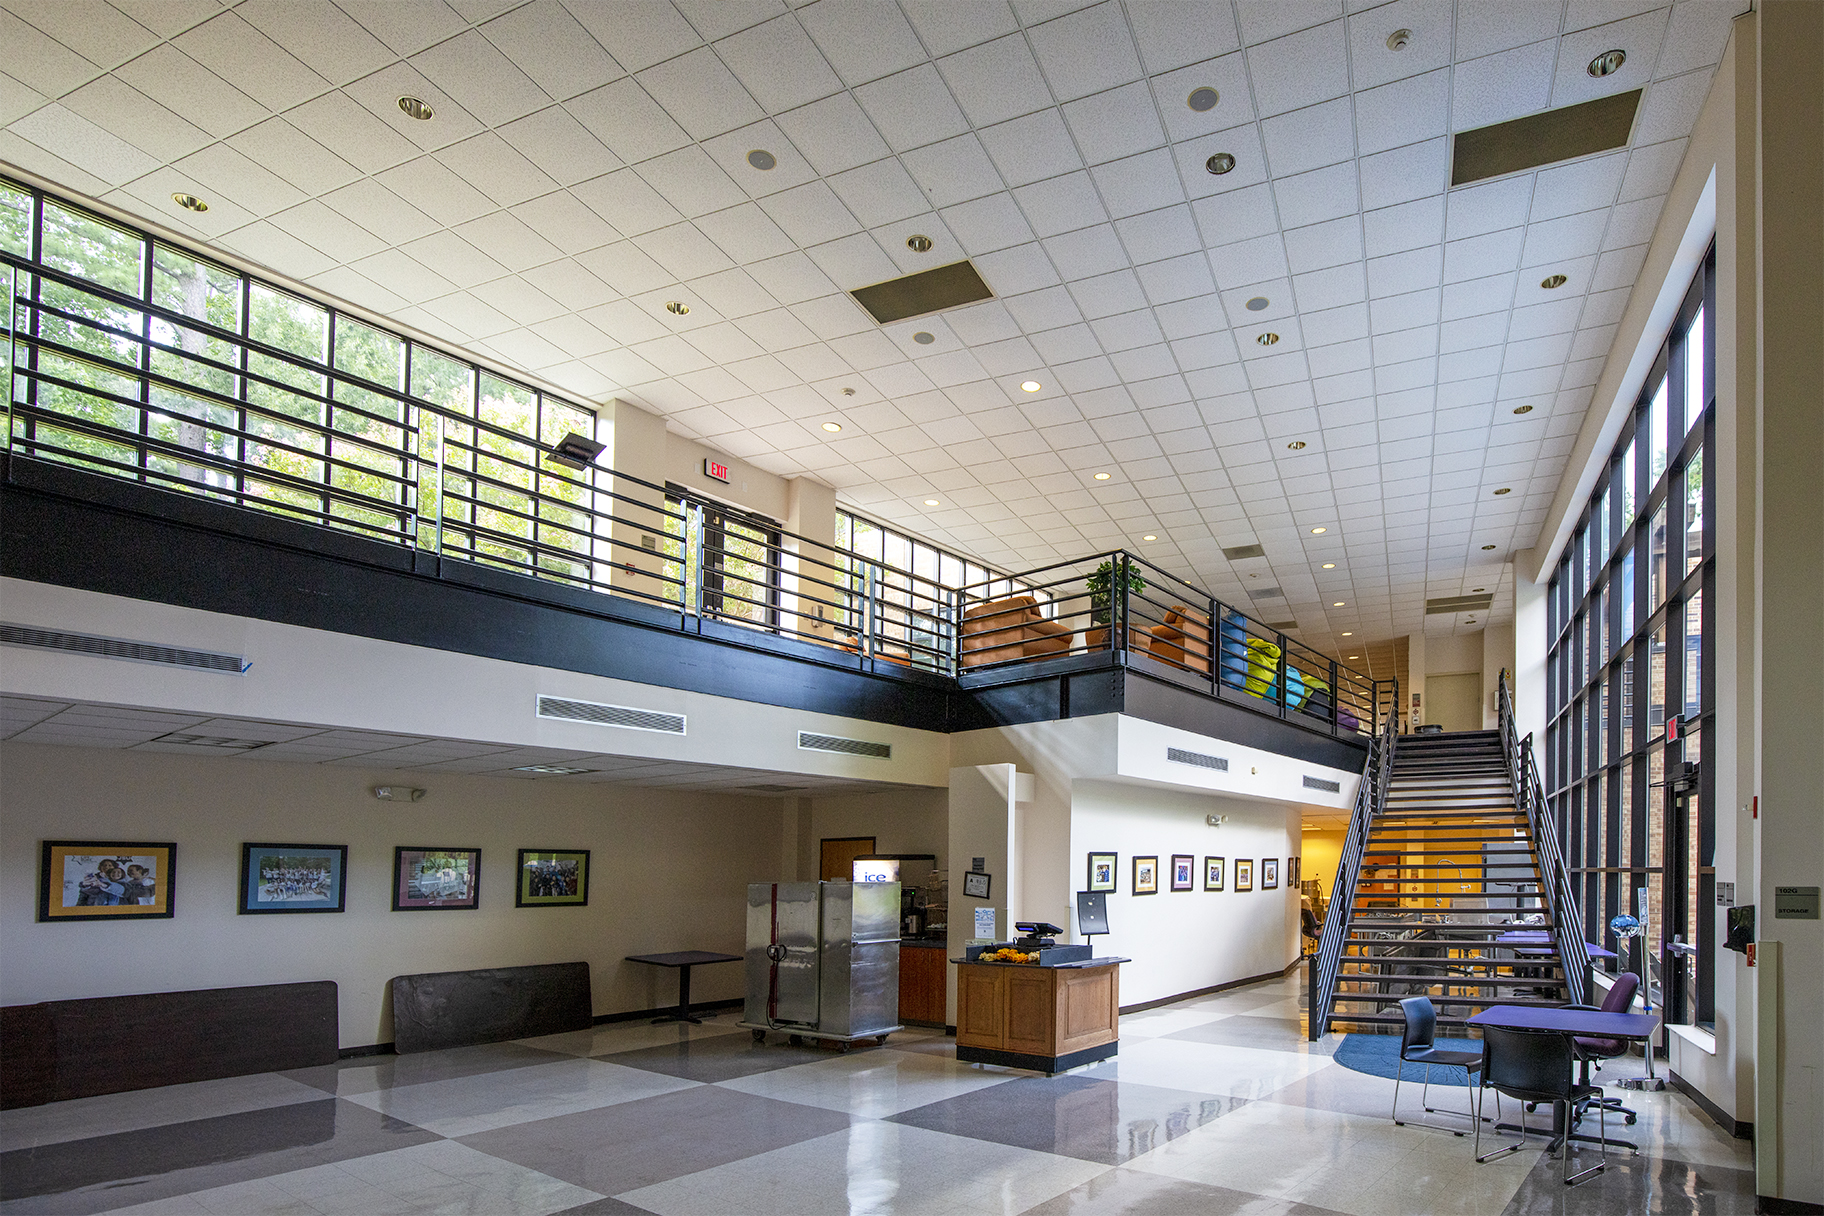 The Commons at the Freeman Center for Jewish Life